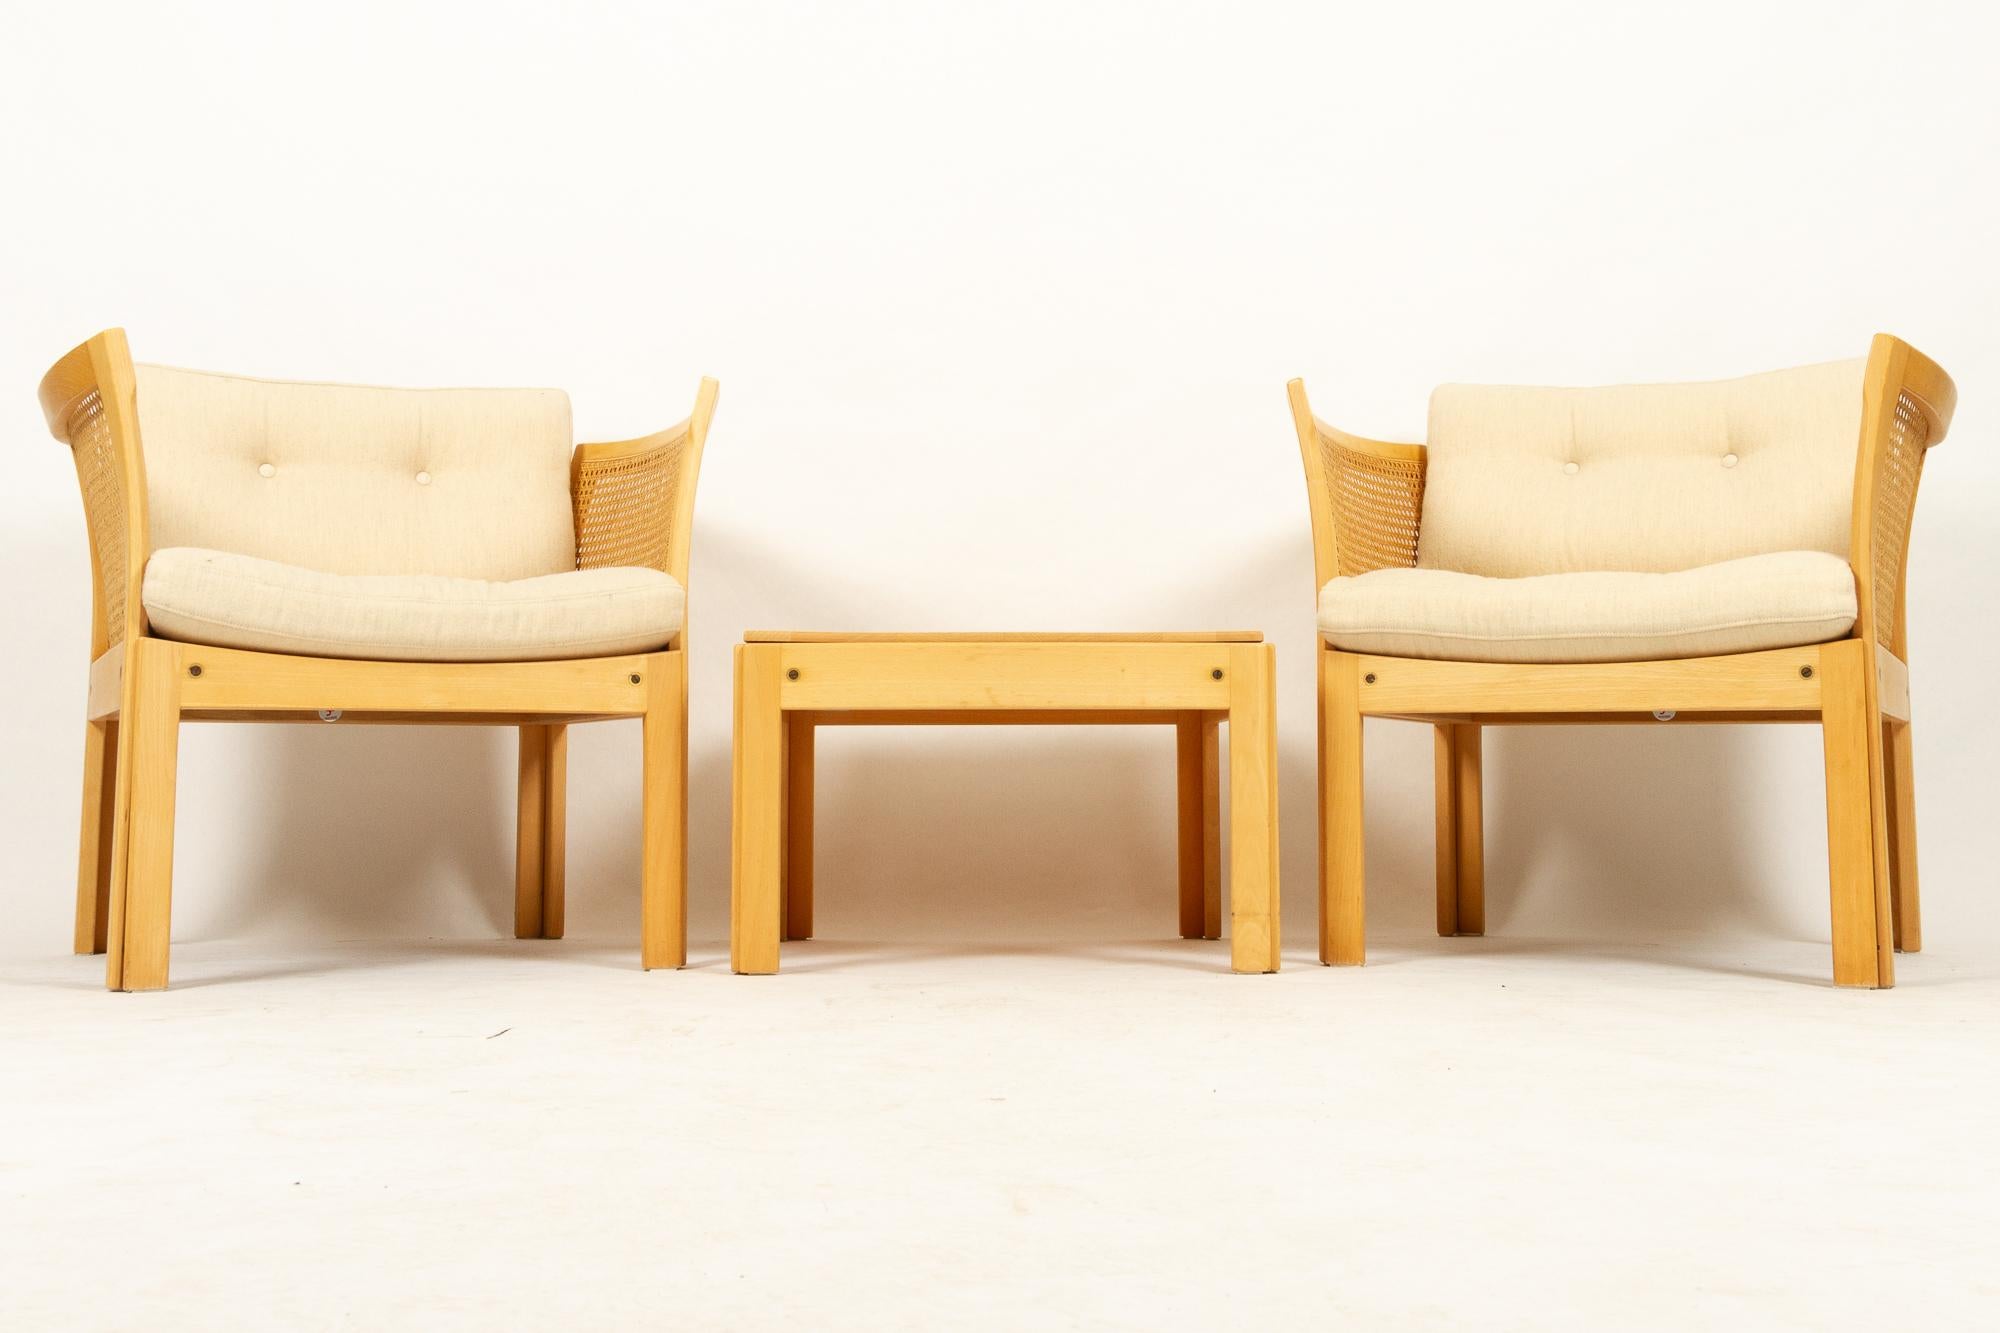 Danish lounge set plexus by Illum Wikkelsø for CFC, 1980s. Nordic light style.
Set of two elegant and light lounge chairs in beech with matching side table. Very comfortable easy chairs with sides and backs in braided cane. Cushions in soft off